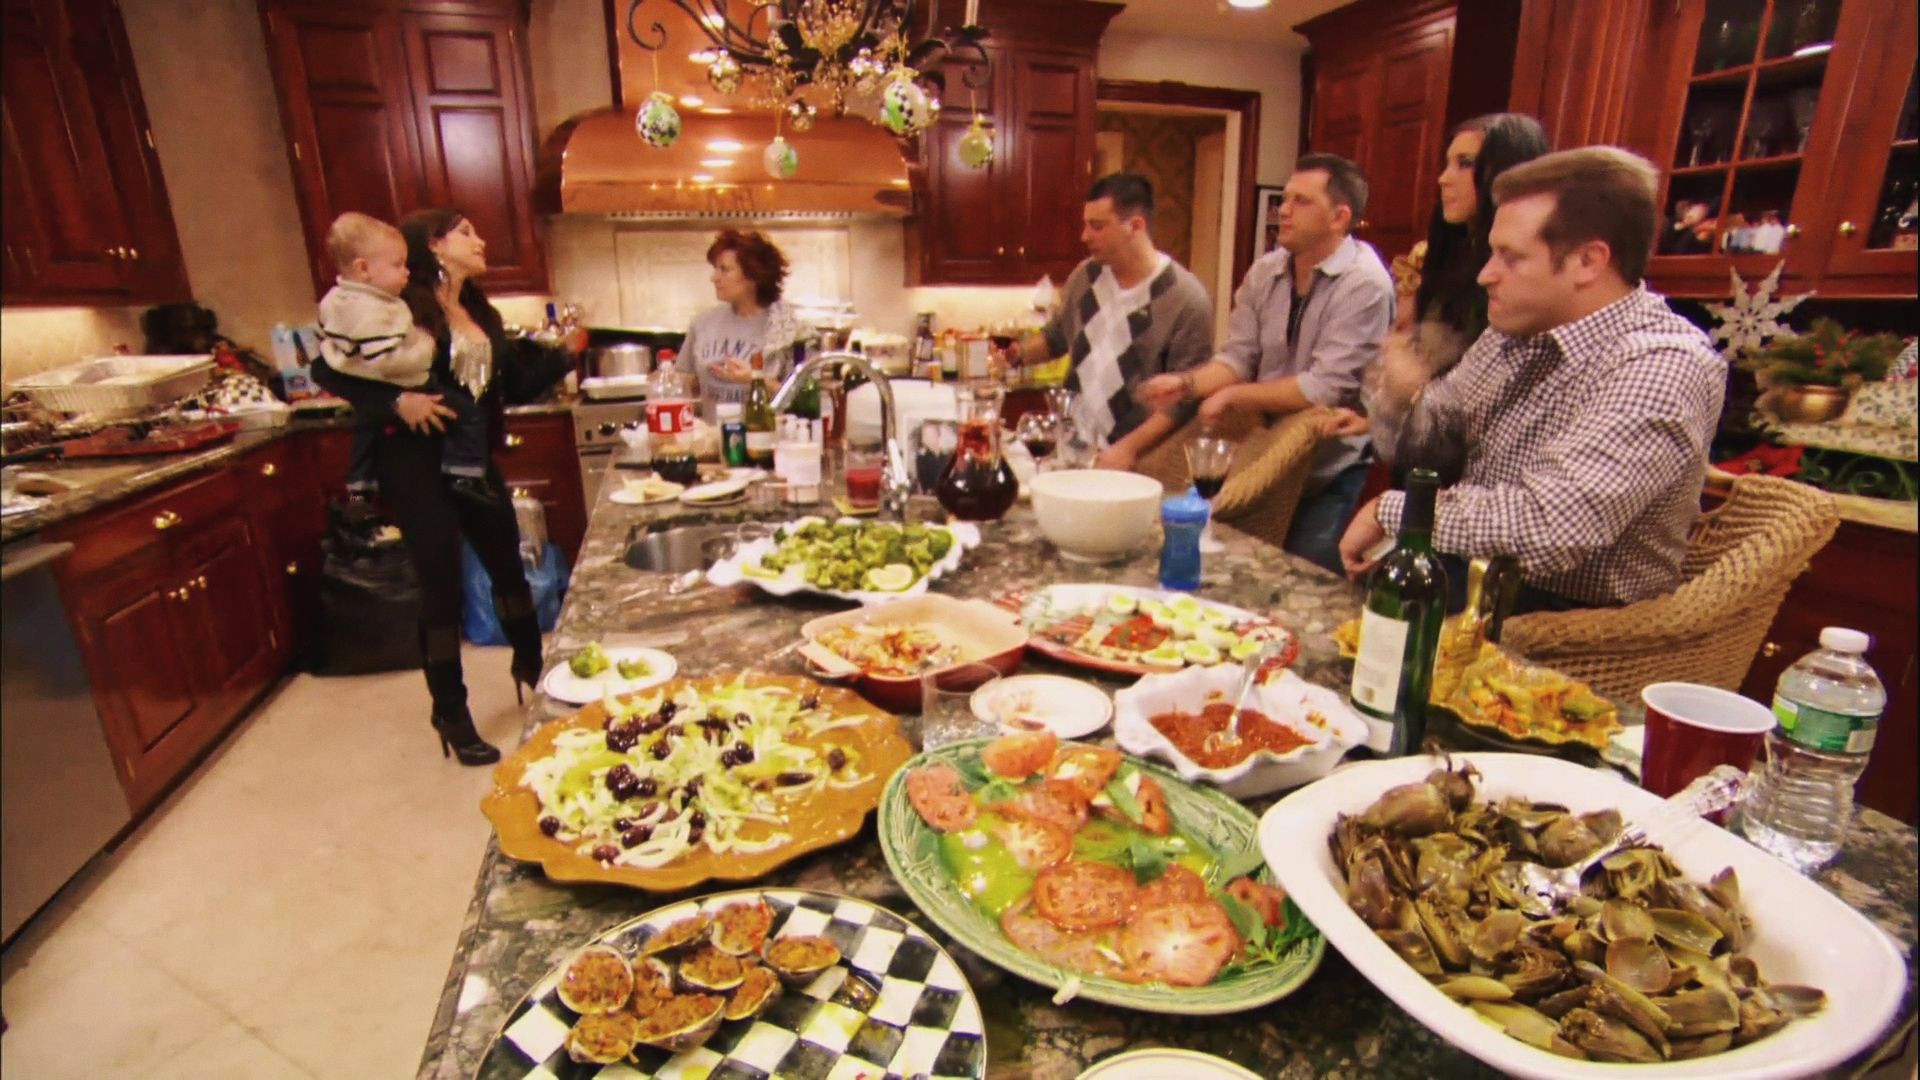 RHONJ The Real Housewives of New Jersey S3E11 saison 3 épisode 11 A Very Jersey Christmas